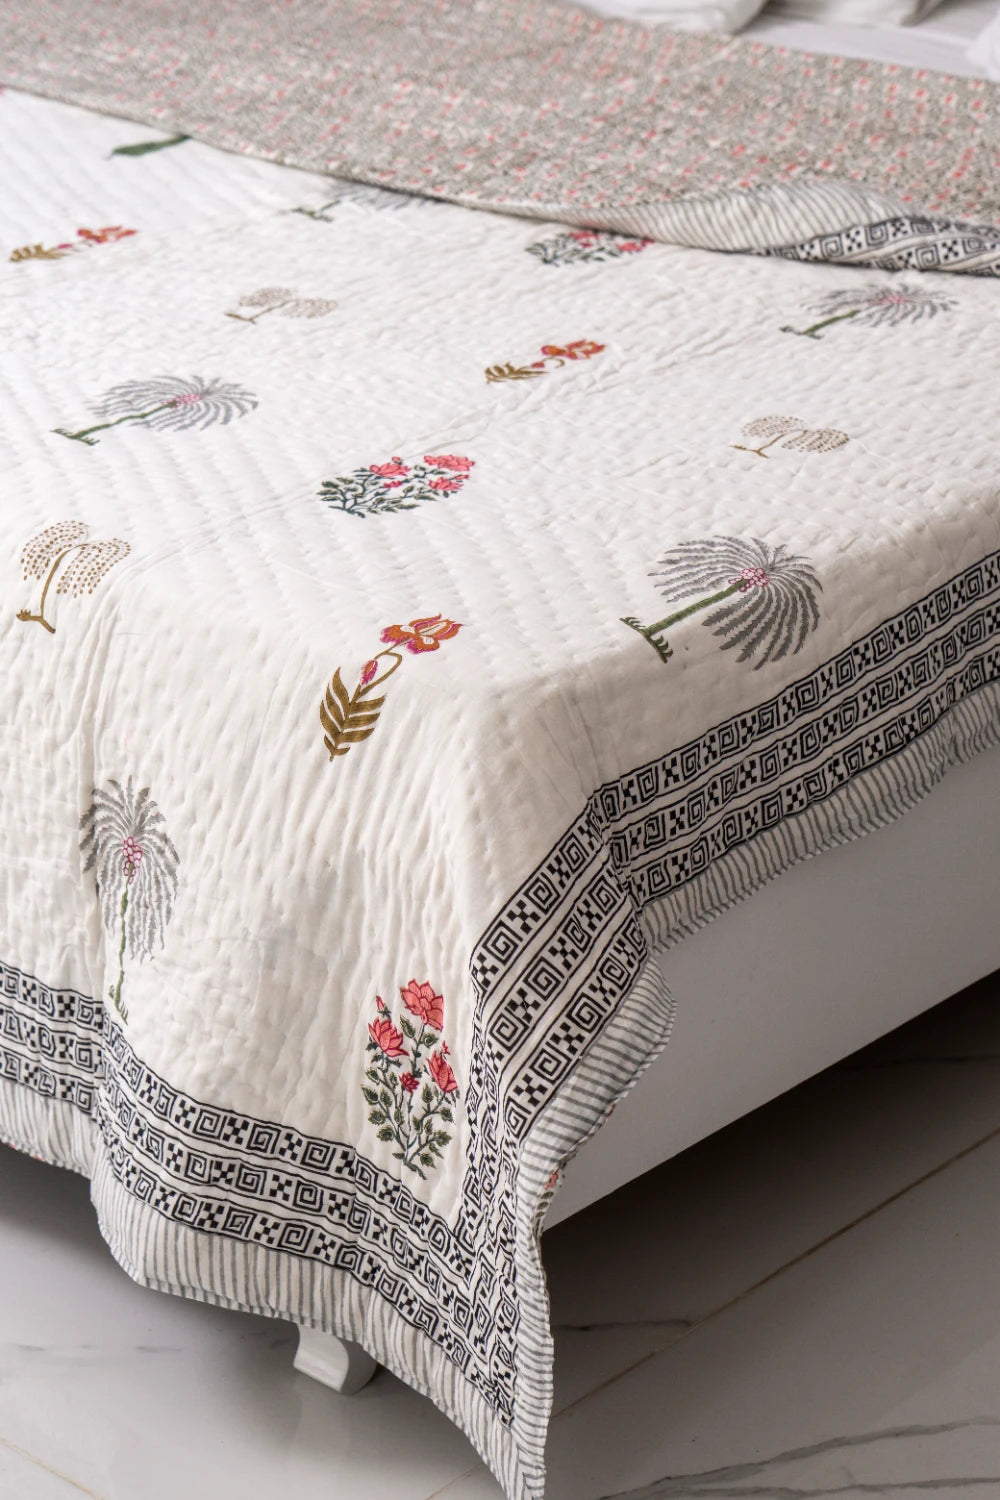 Shop All Season Mulmul Cotton Quilts at Affordable Prices in India